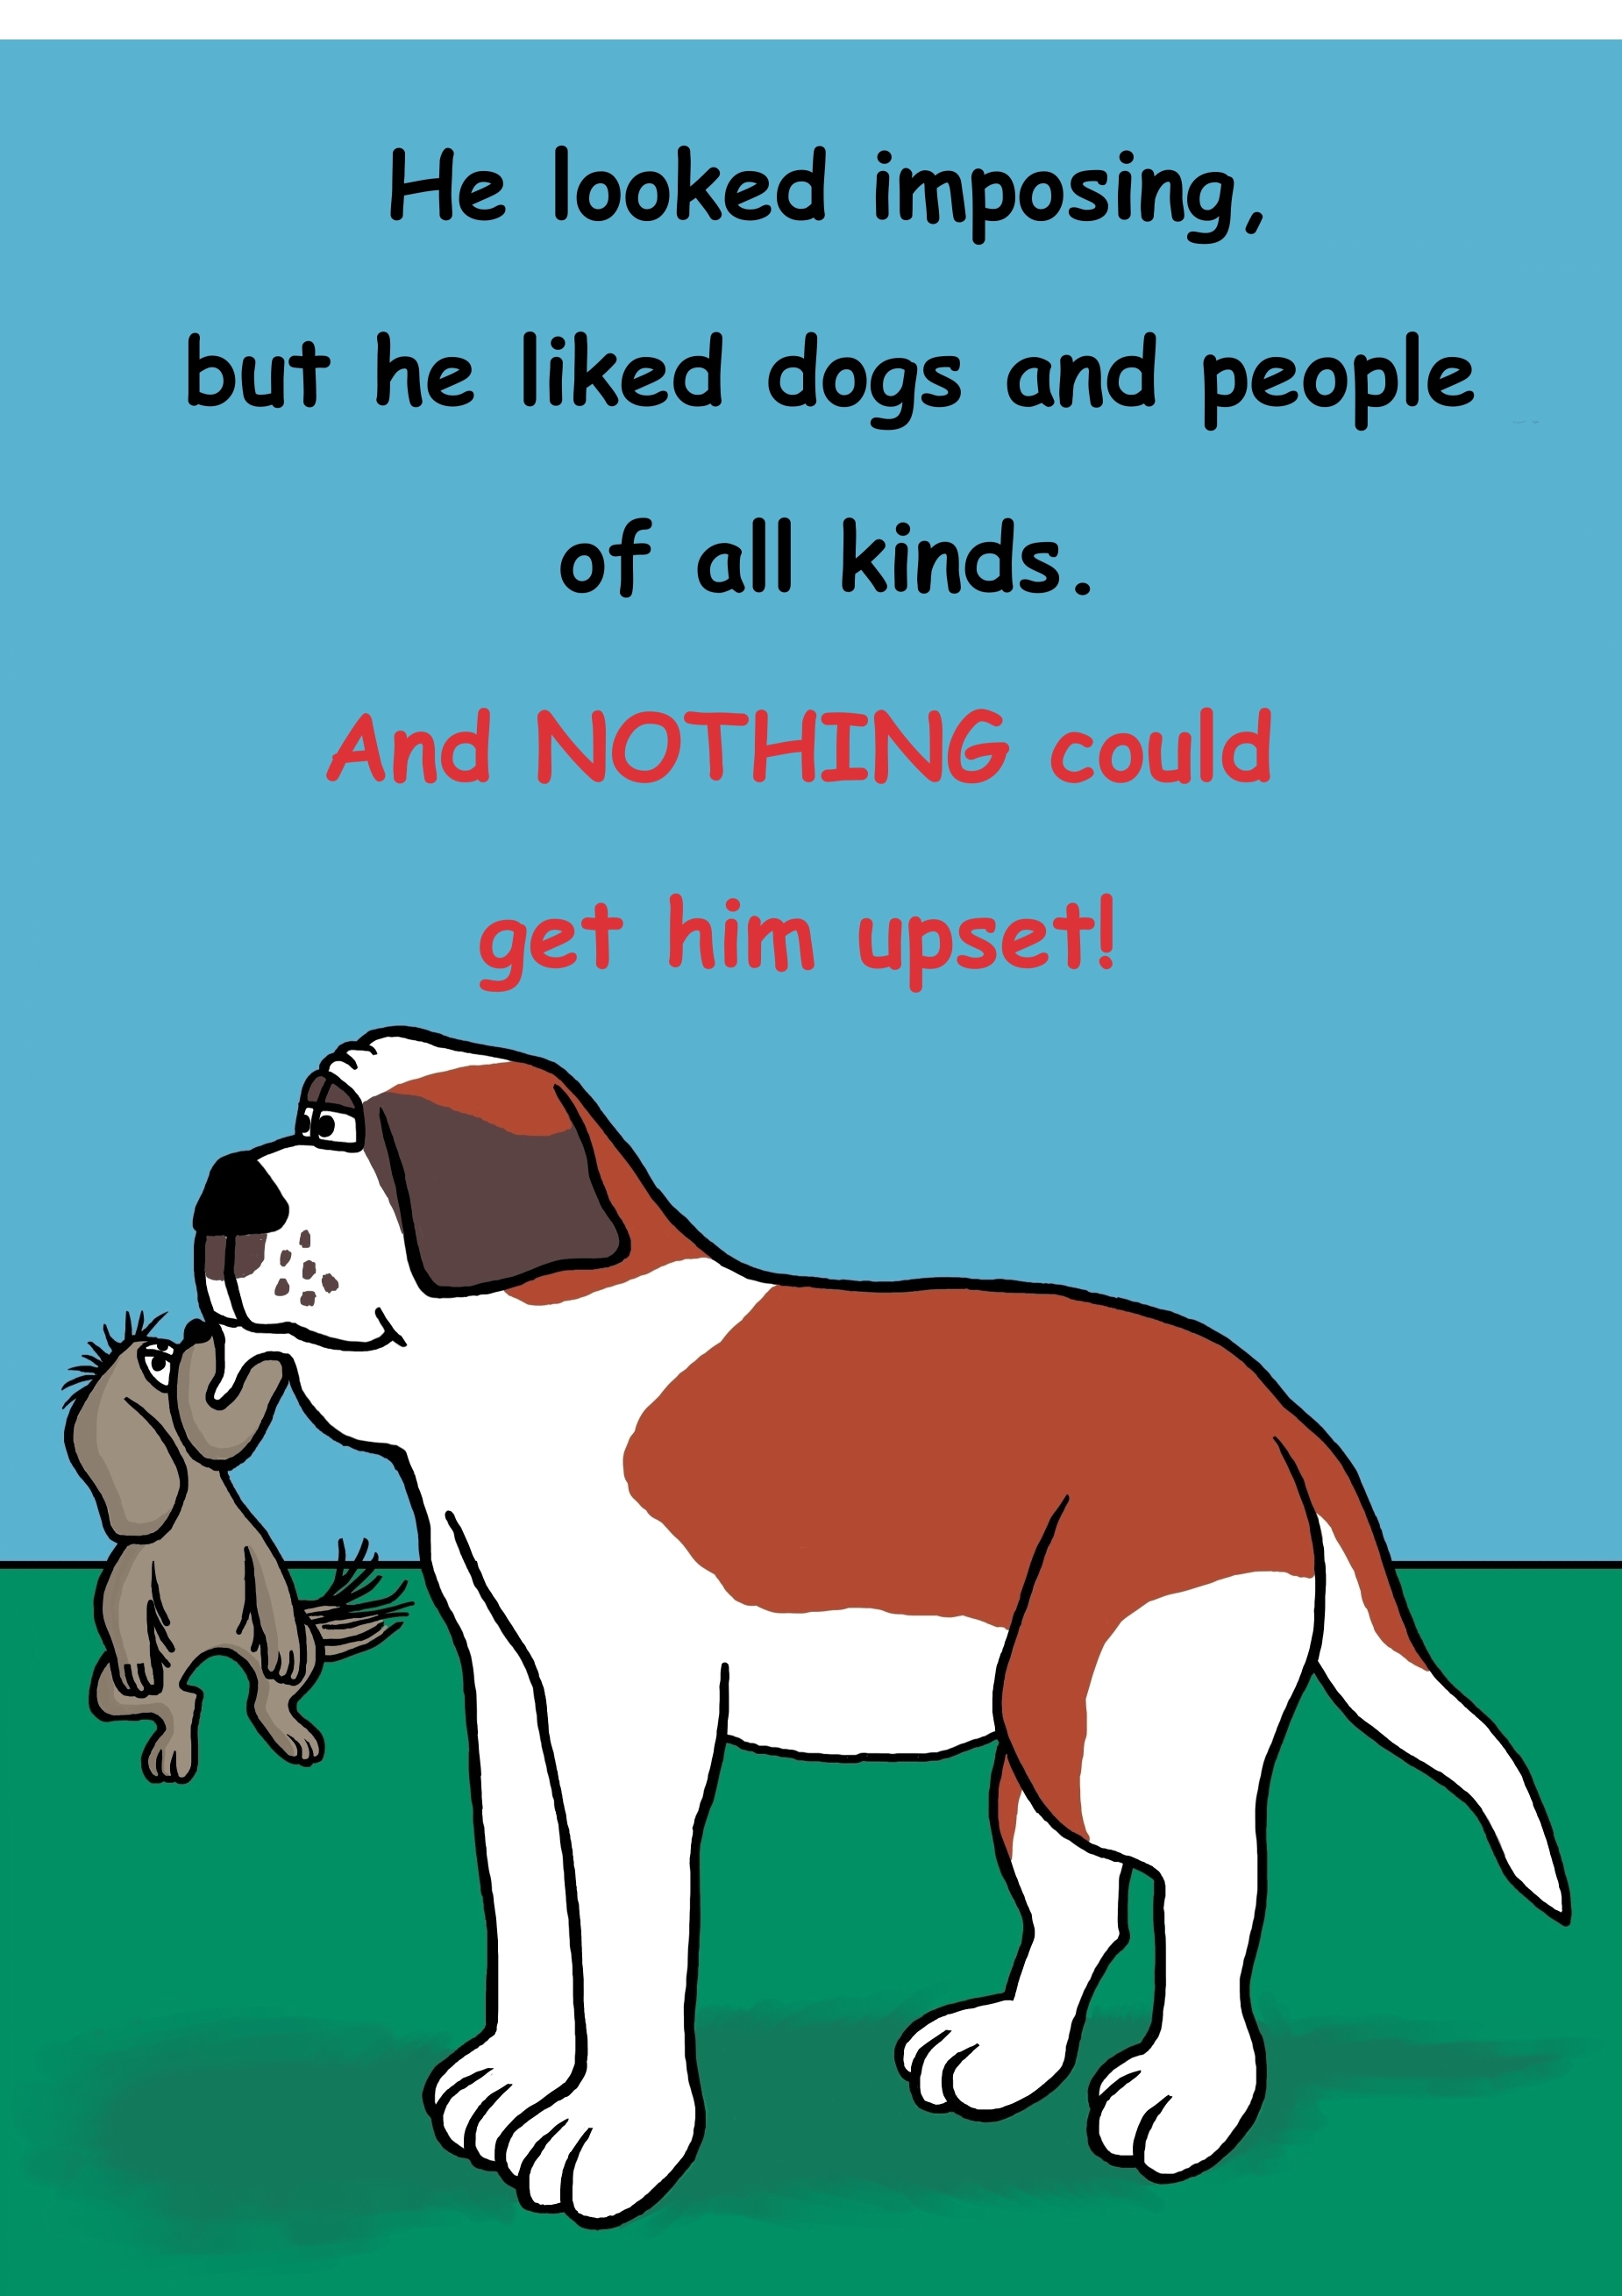 He looked imposing, but he liked dogs and people of all kinds. And, nothing could get him upset!